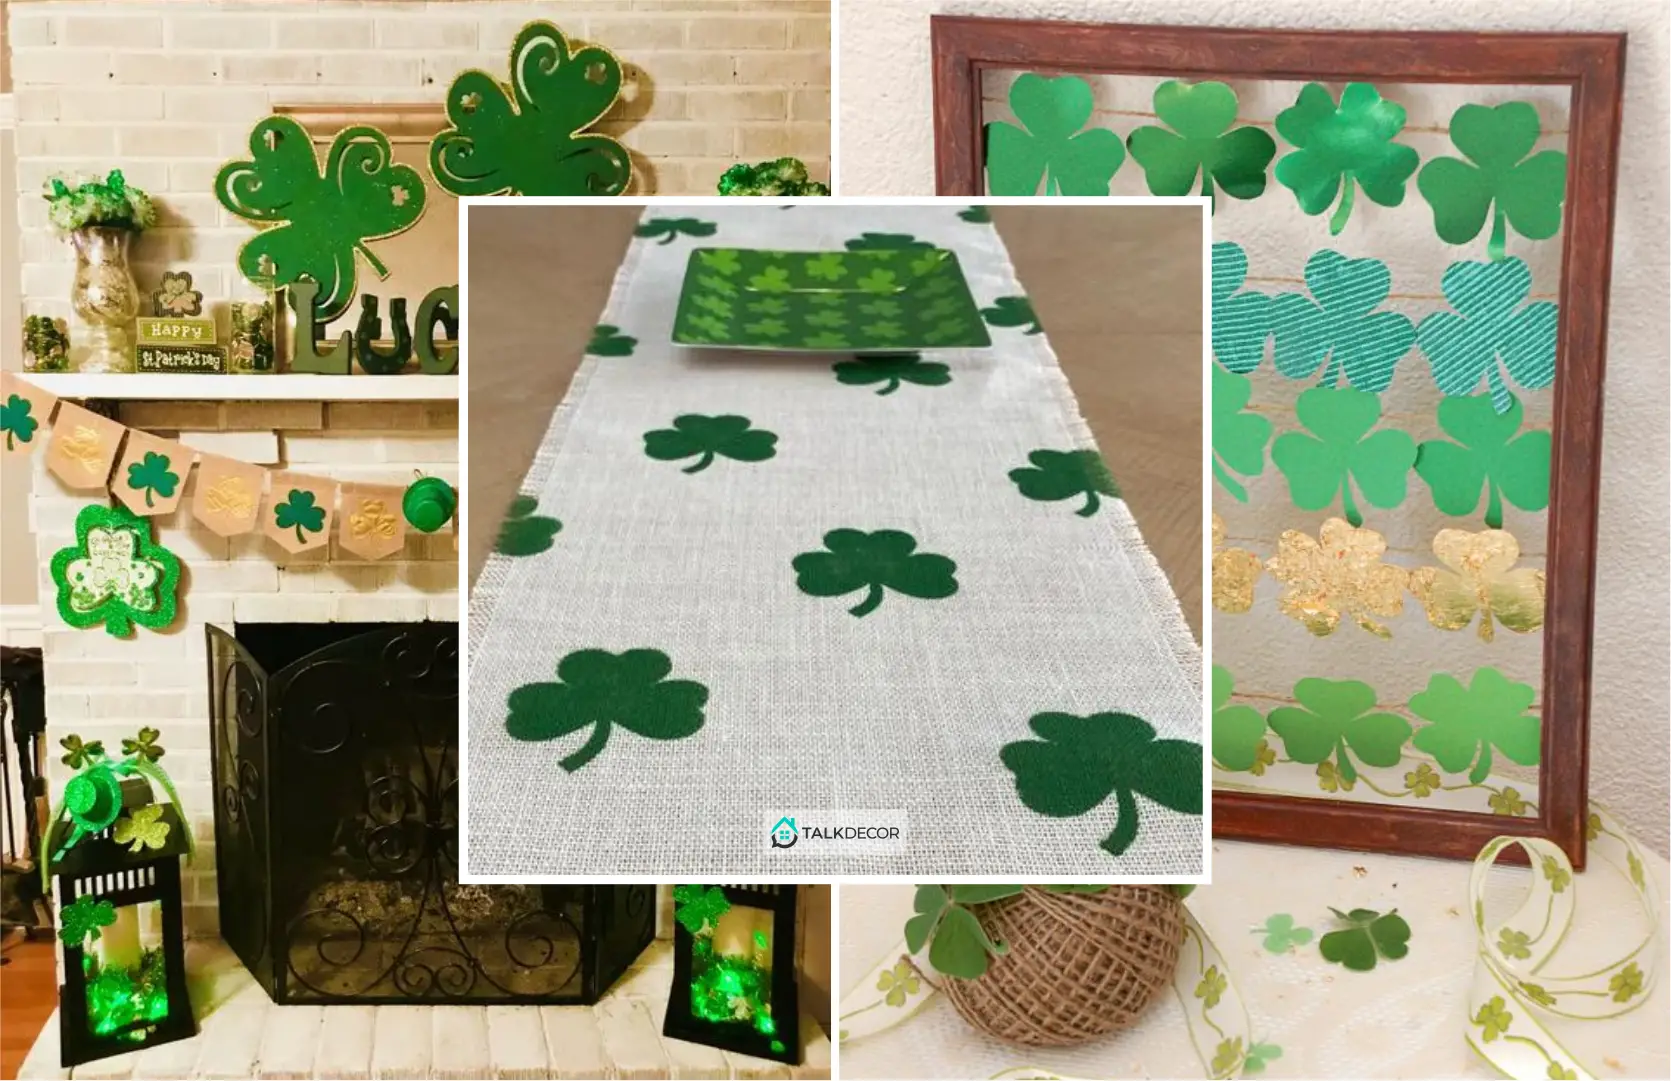 Get Ready for St. Patrick’s Day! Here are the Decoration Ideas You Can Have